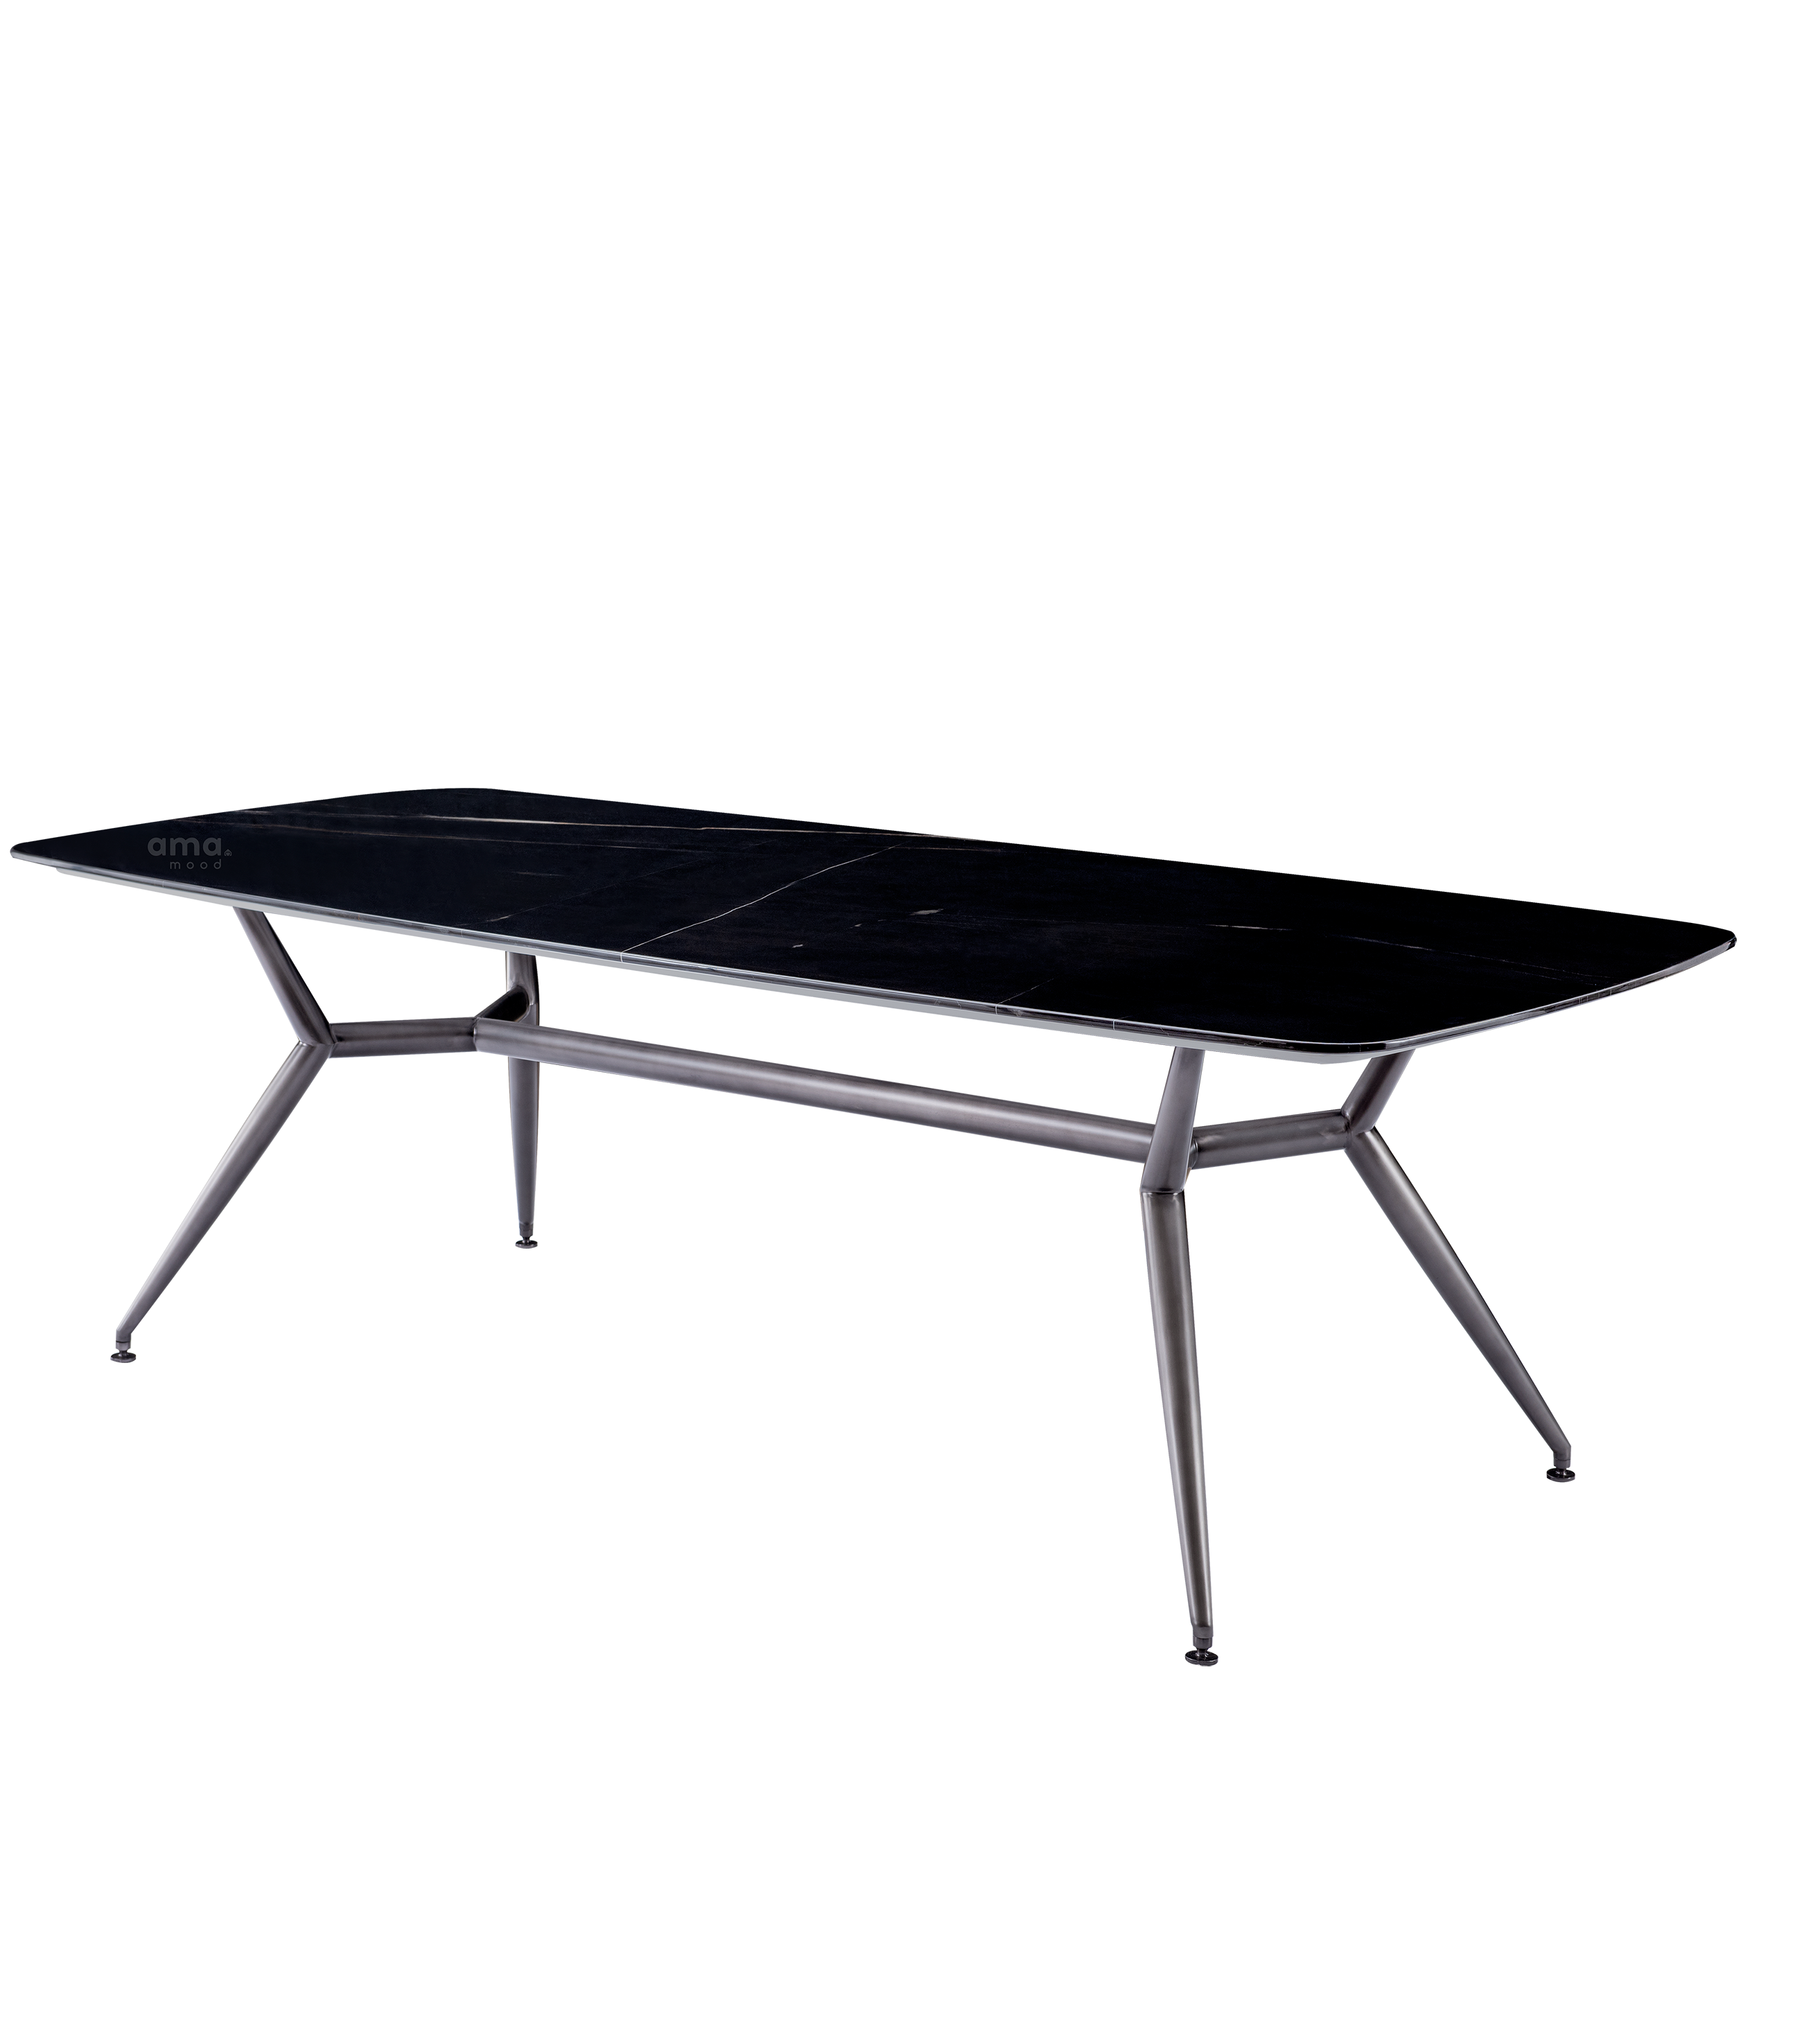 Dining Table 6 Seater | Dining Table Supplier